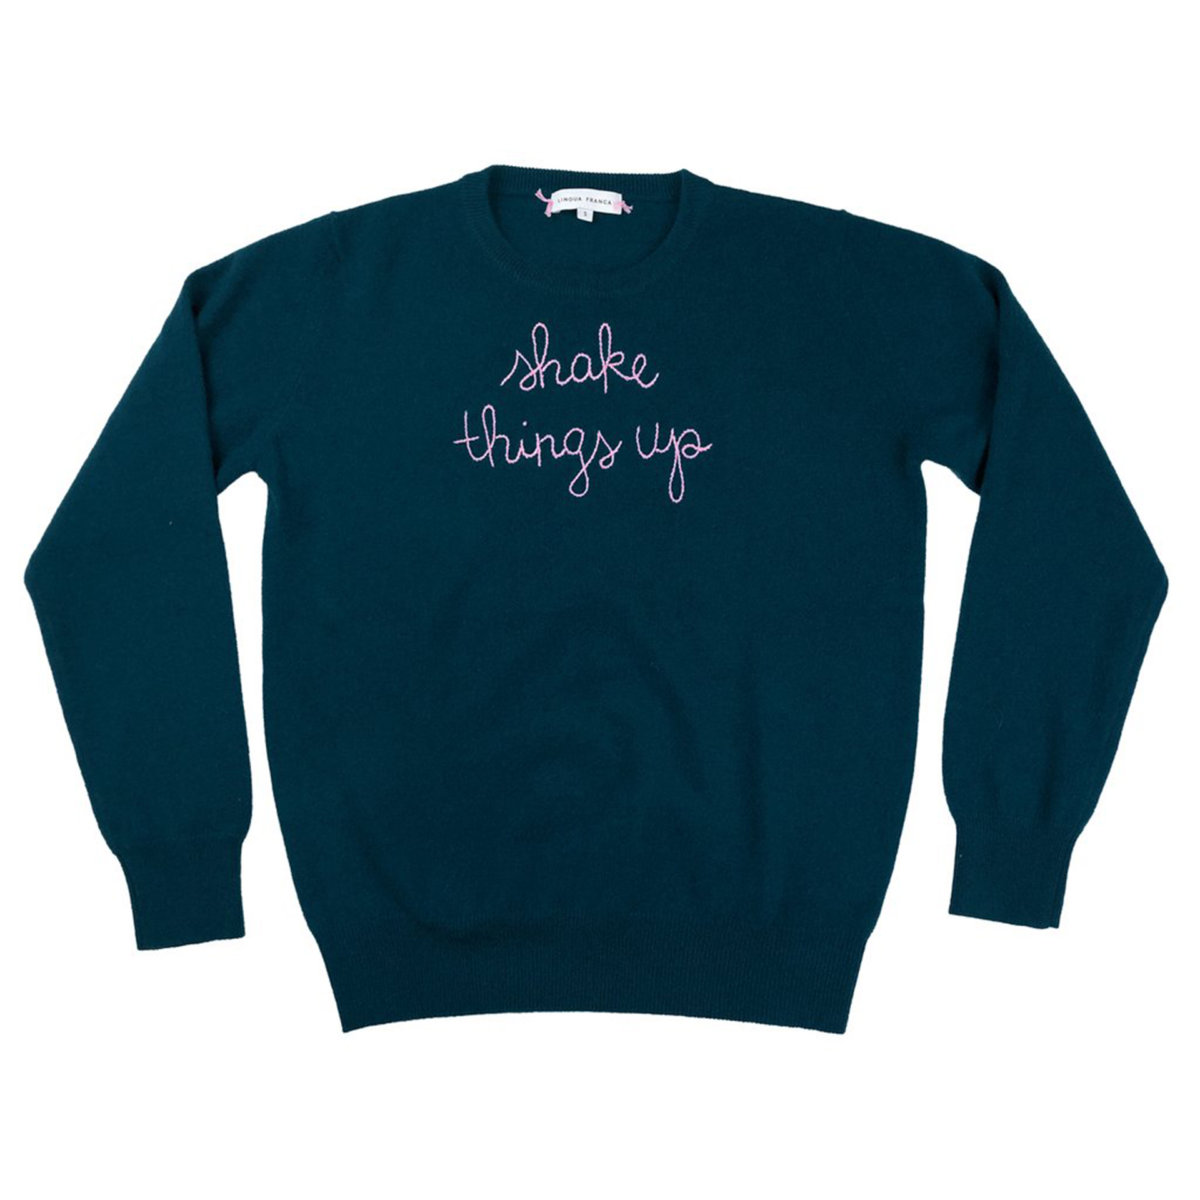 Lingua Franca “Shake Things Up” cashmere sweater, $380